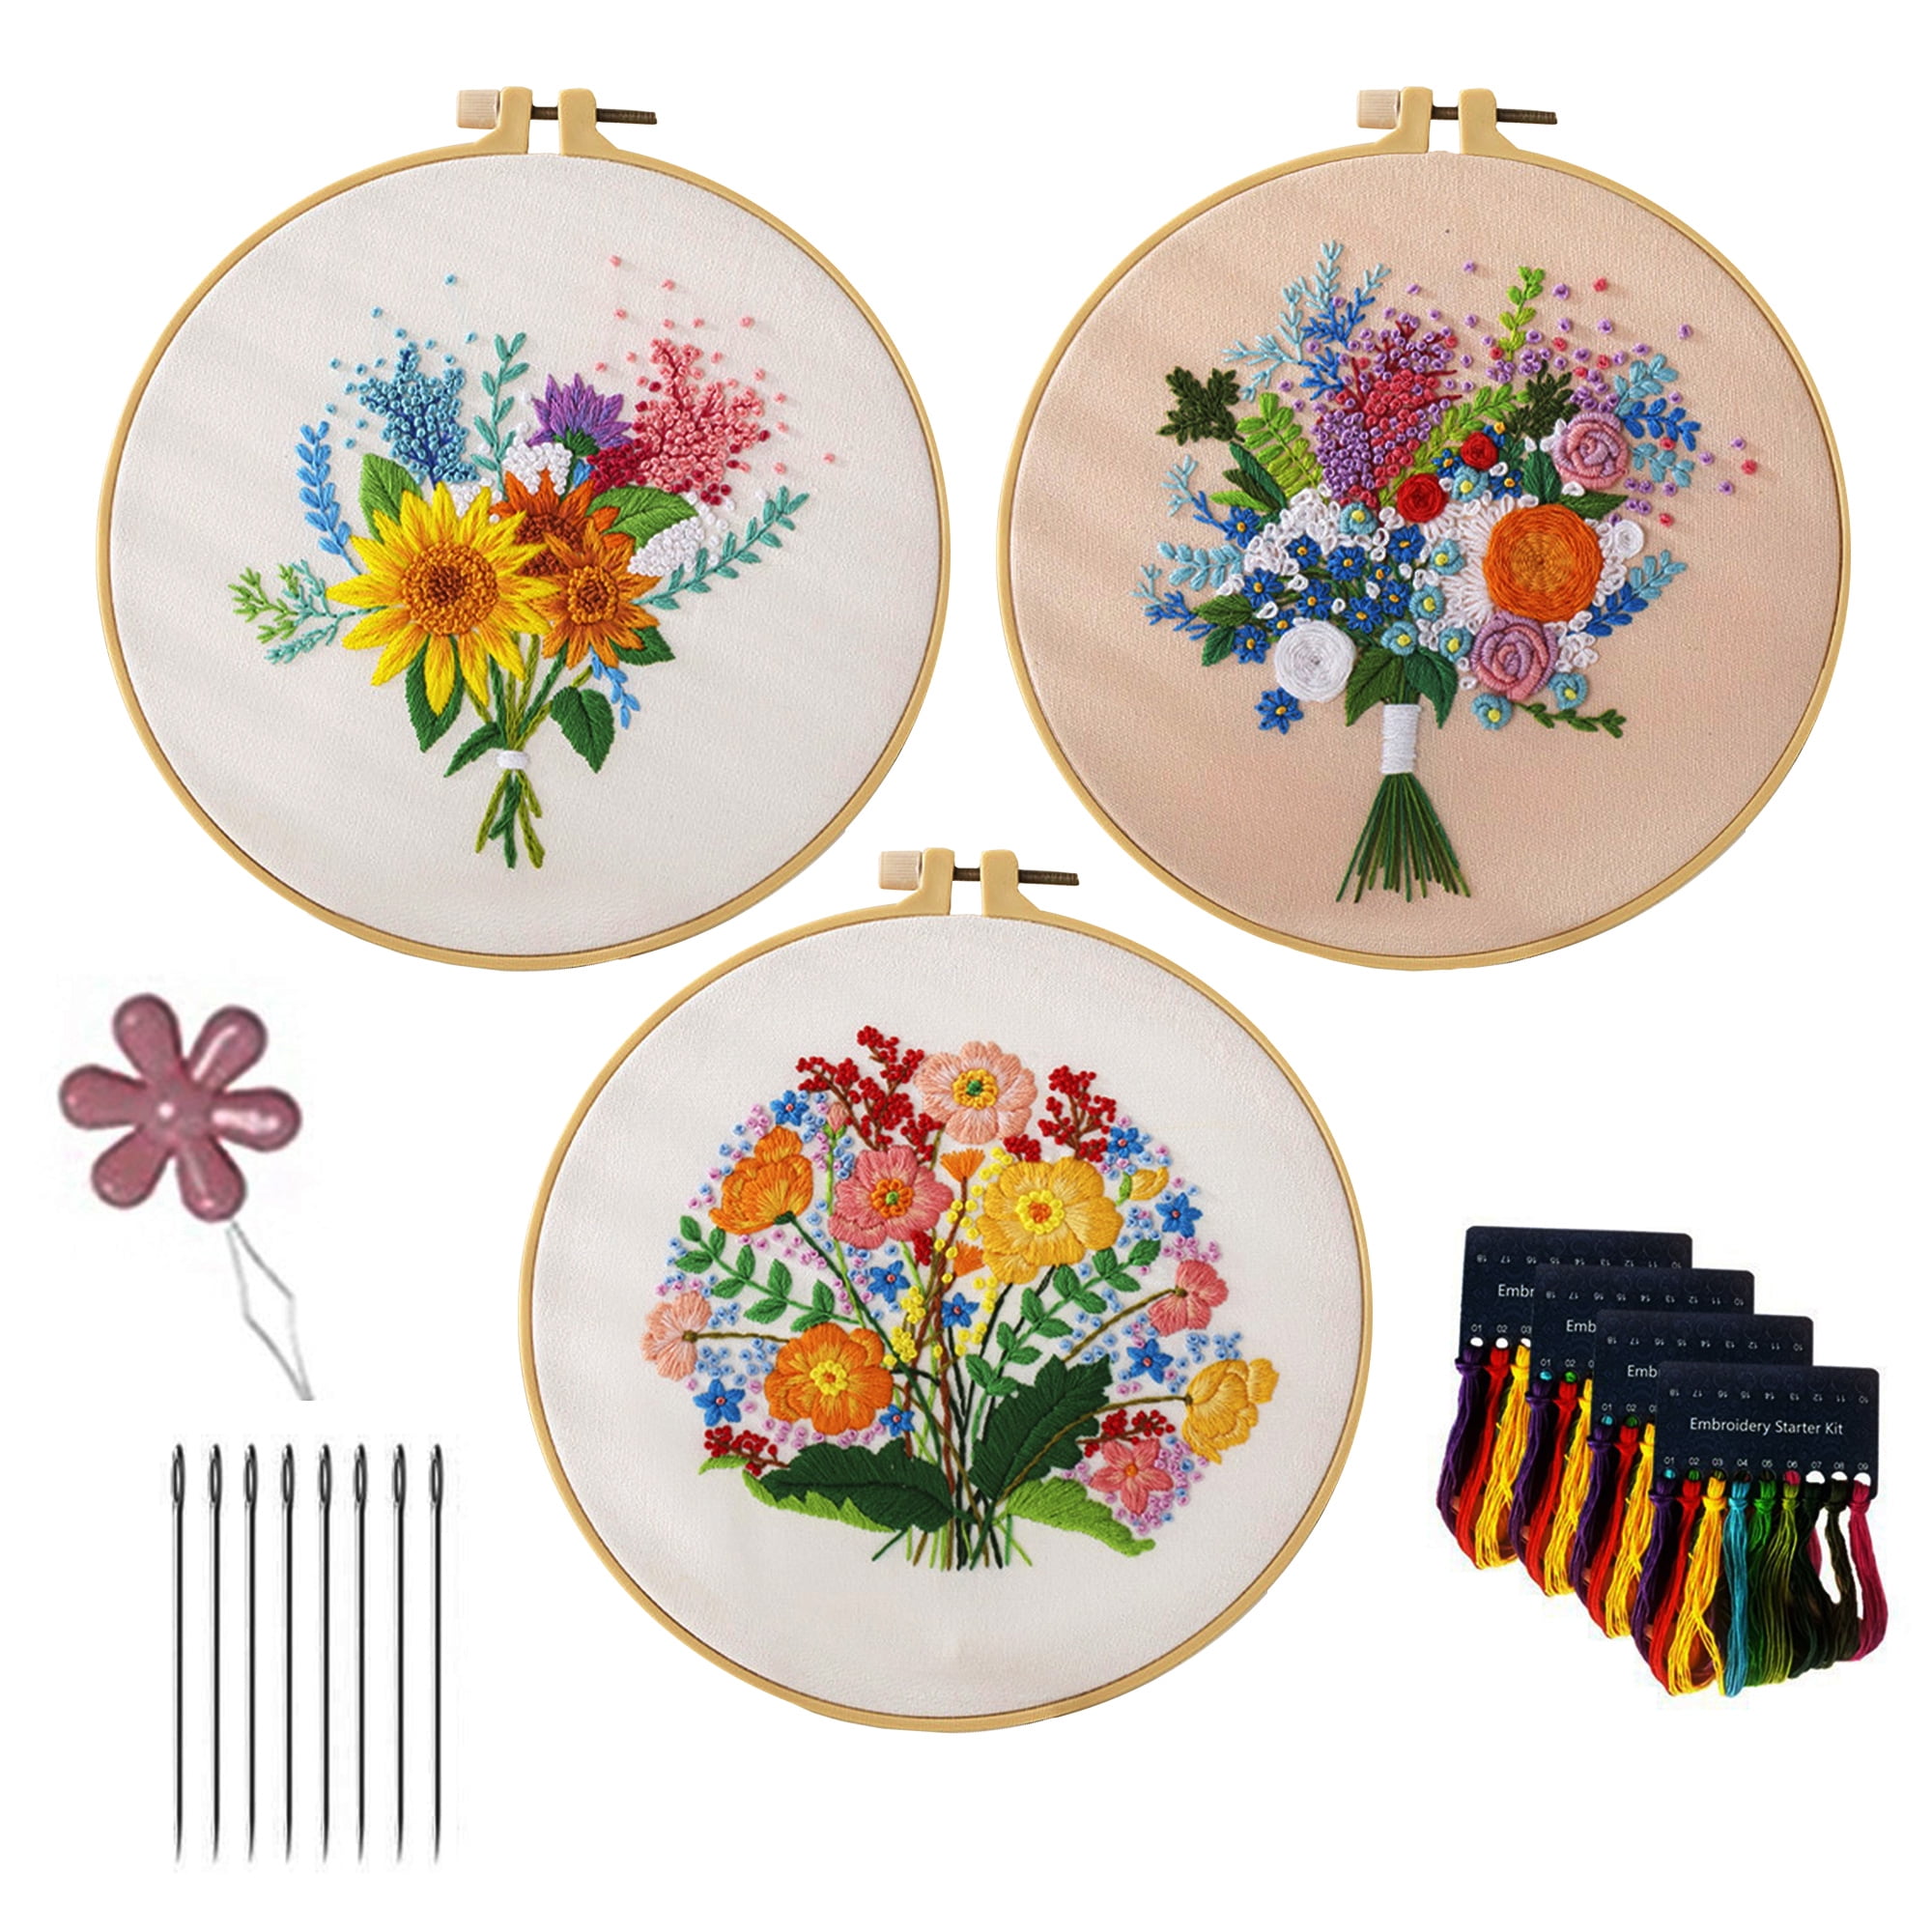 Blingpainting 3PC Handheld Flower Embroidery - Easy-to-Use, Portable,  Beautiful Designs, Embroidery Kit for Art Craft Handy Sewing, Perfect for  DIY Beginners 